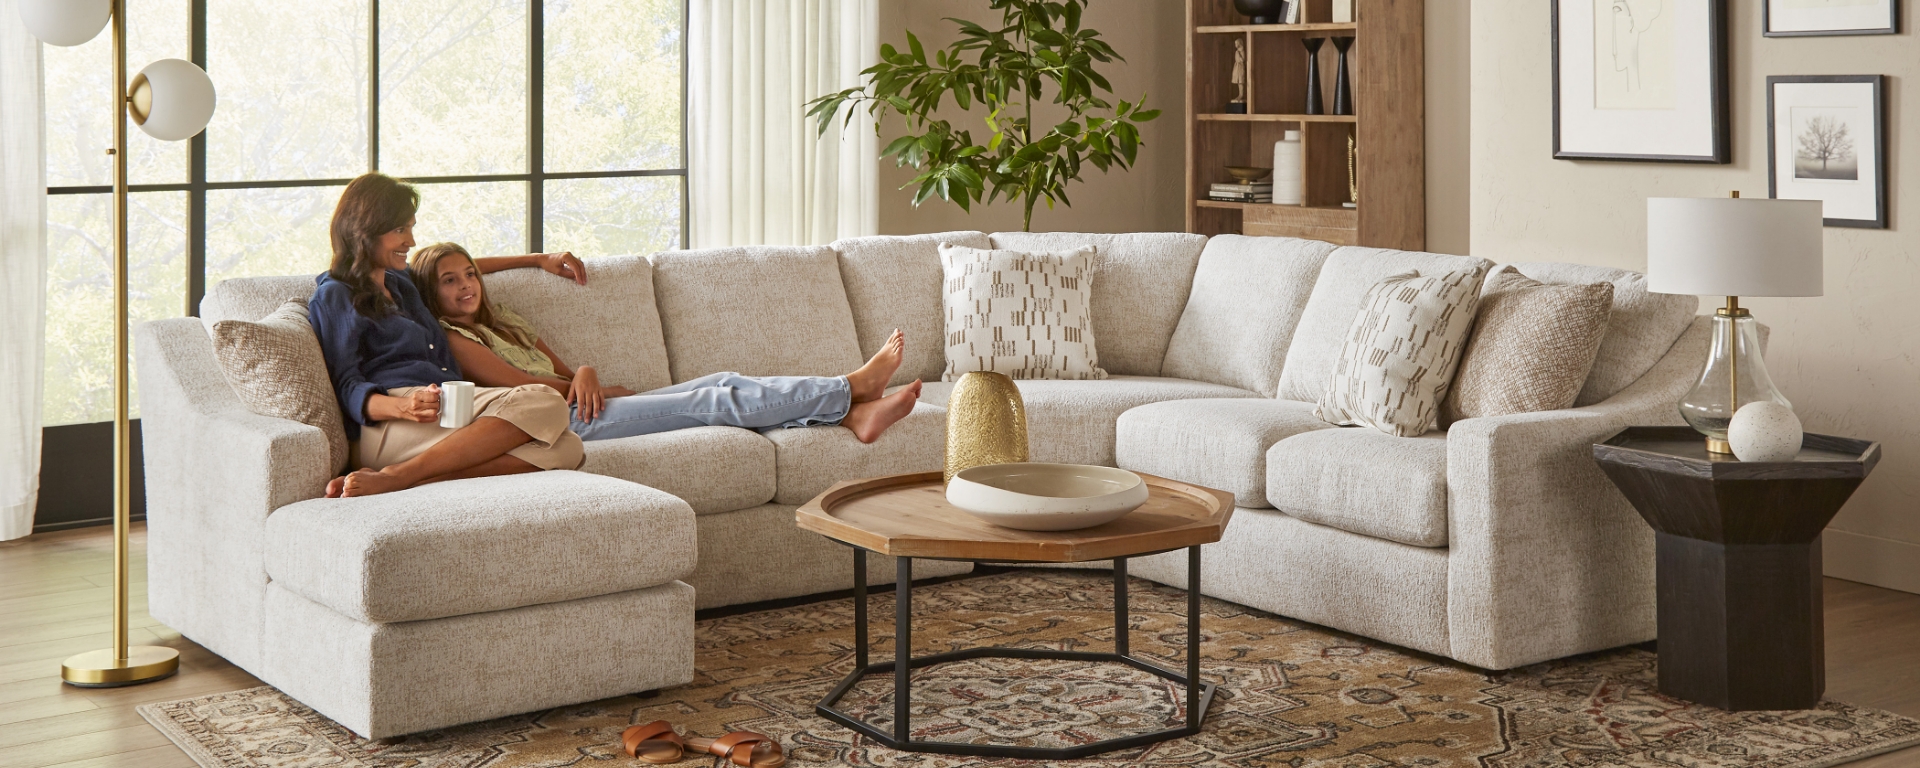 Bring Quality, Comfort, and Style to Your Home